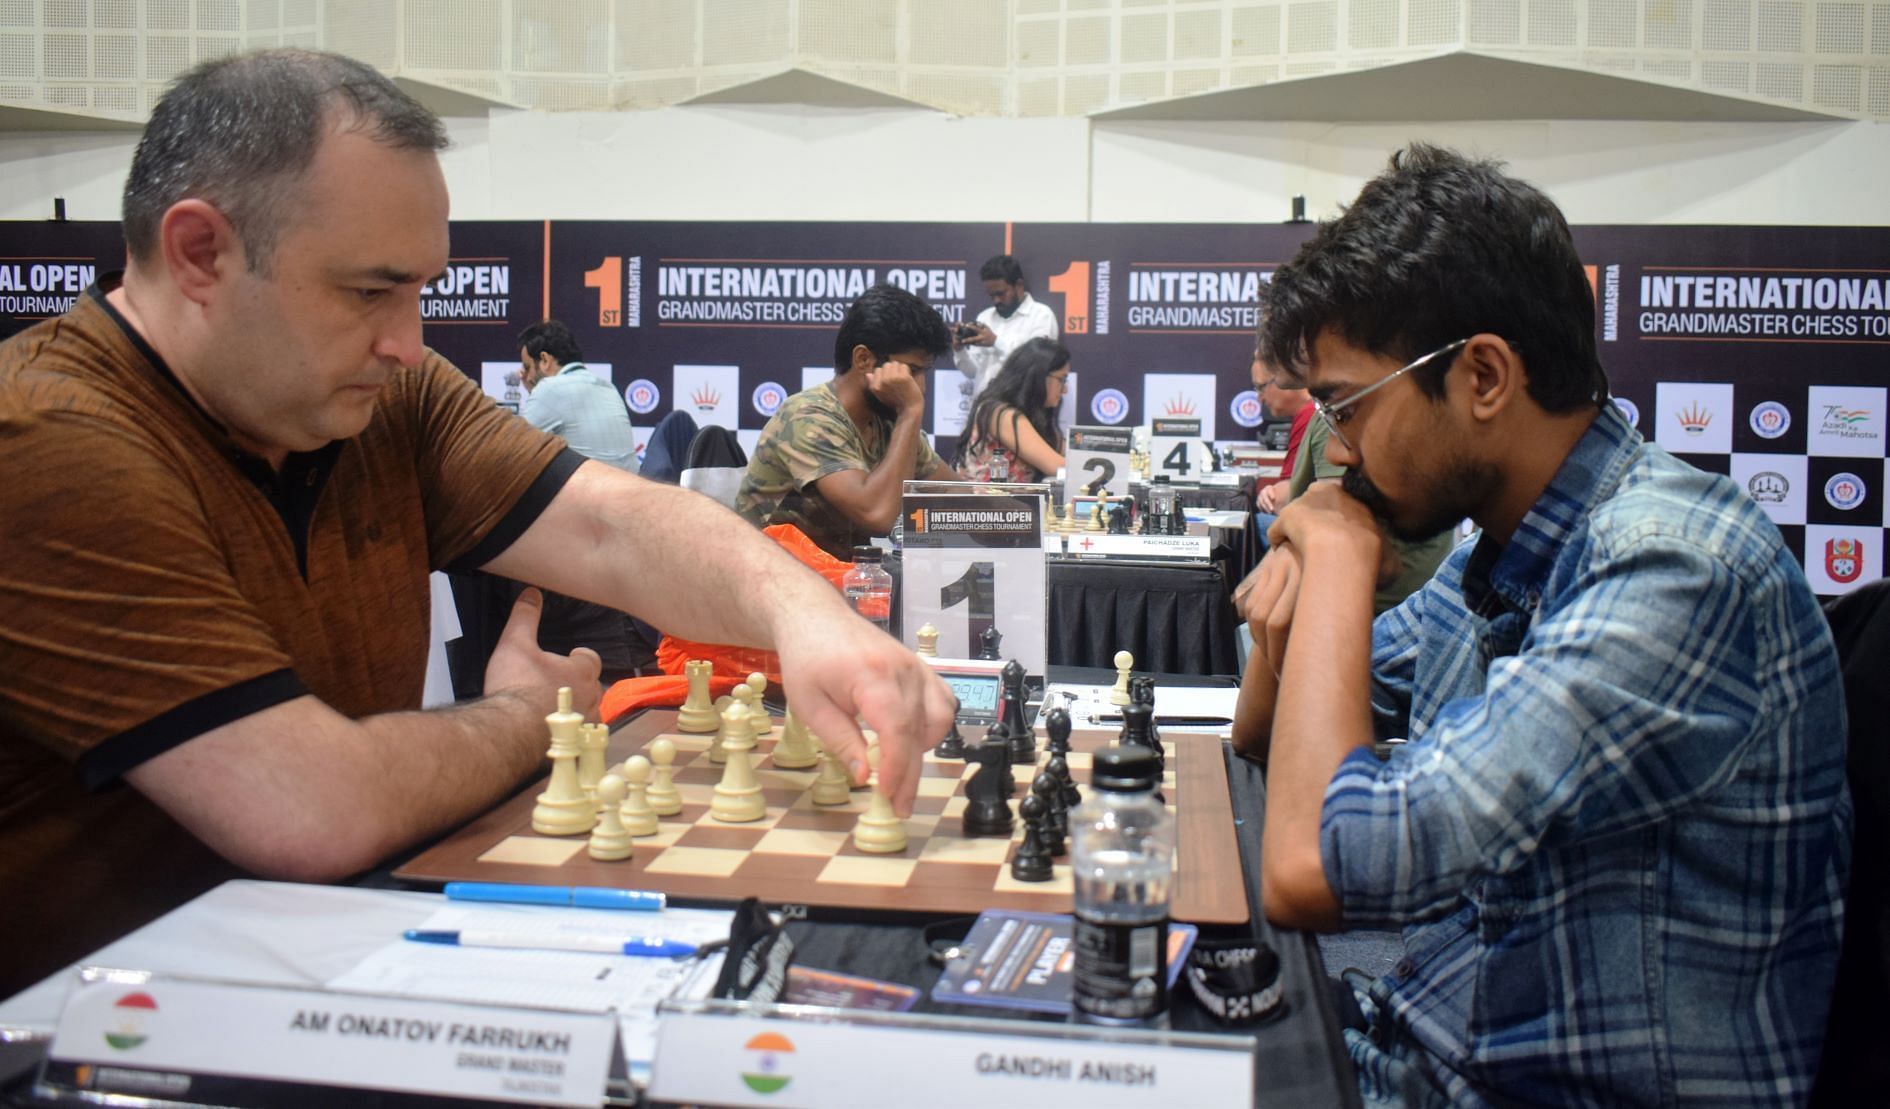 GM Farrukh Amonatov (L) making a move against Anish Gandhi during the opening round of the Maharashtra International Chess tournament in Pune on Tuesday.(Pic credit: AICF)